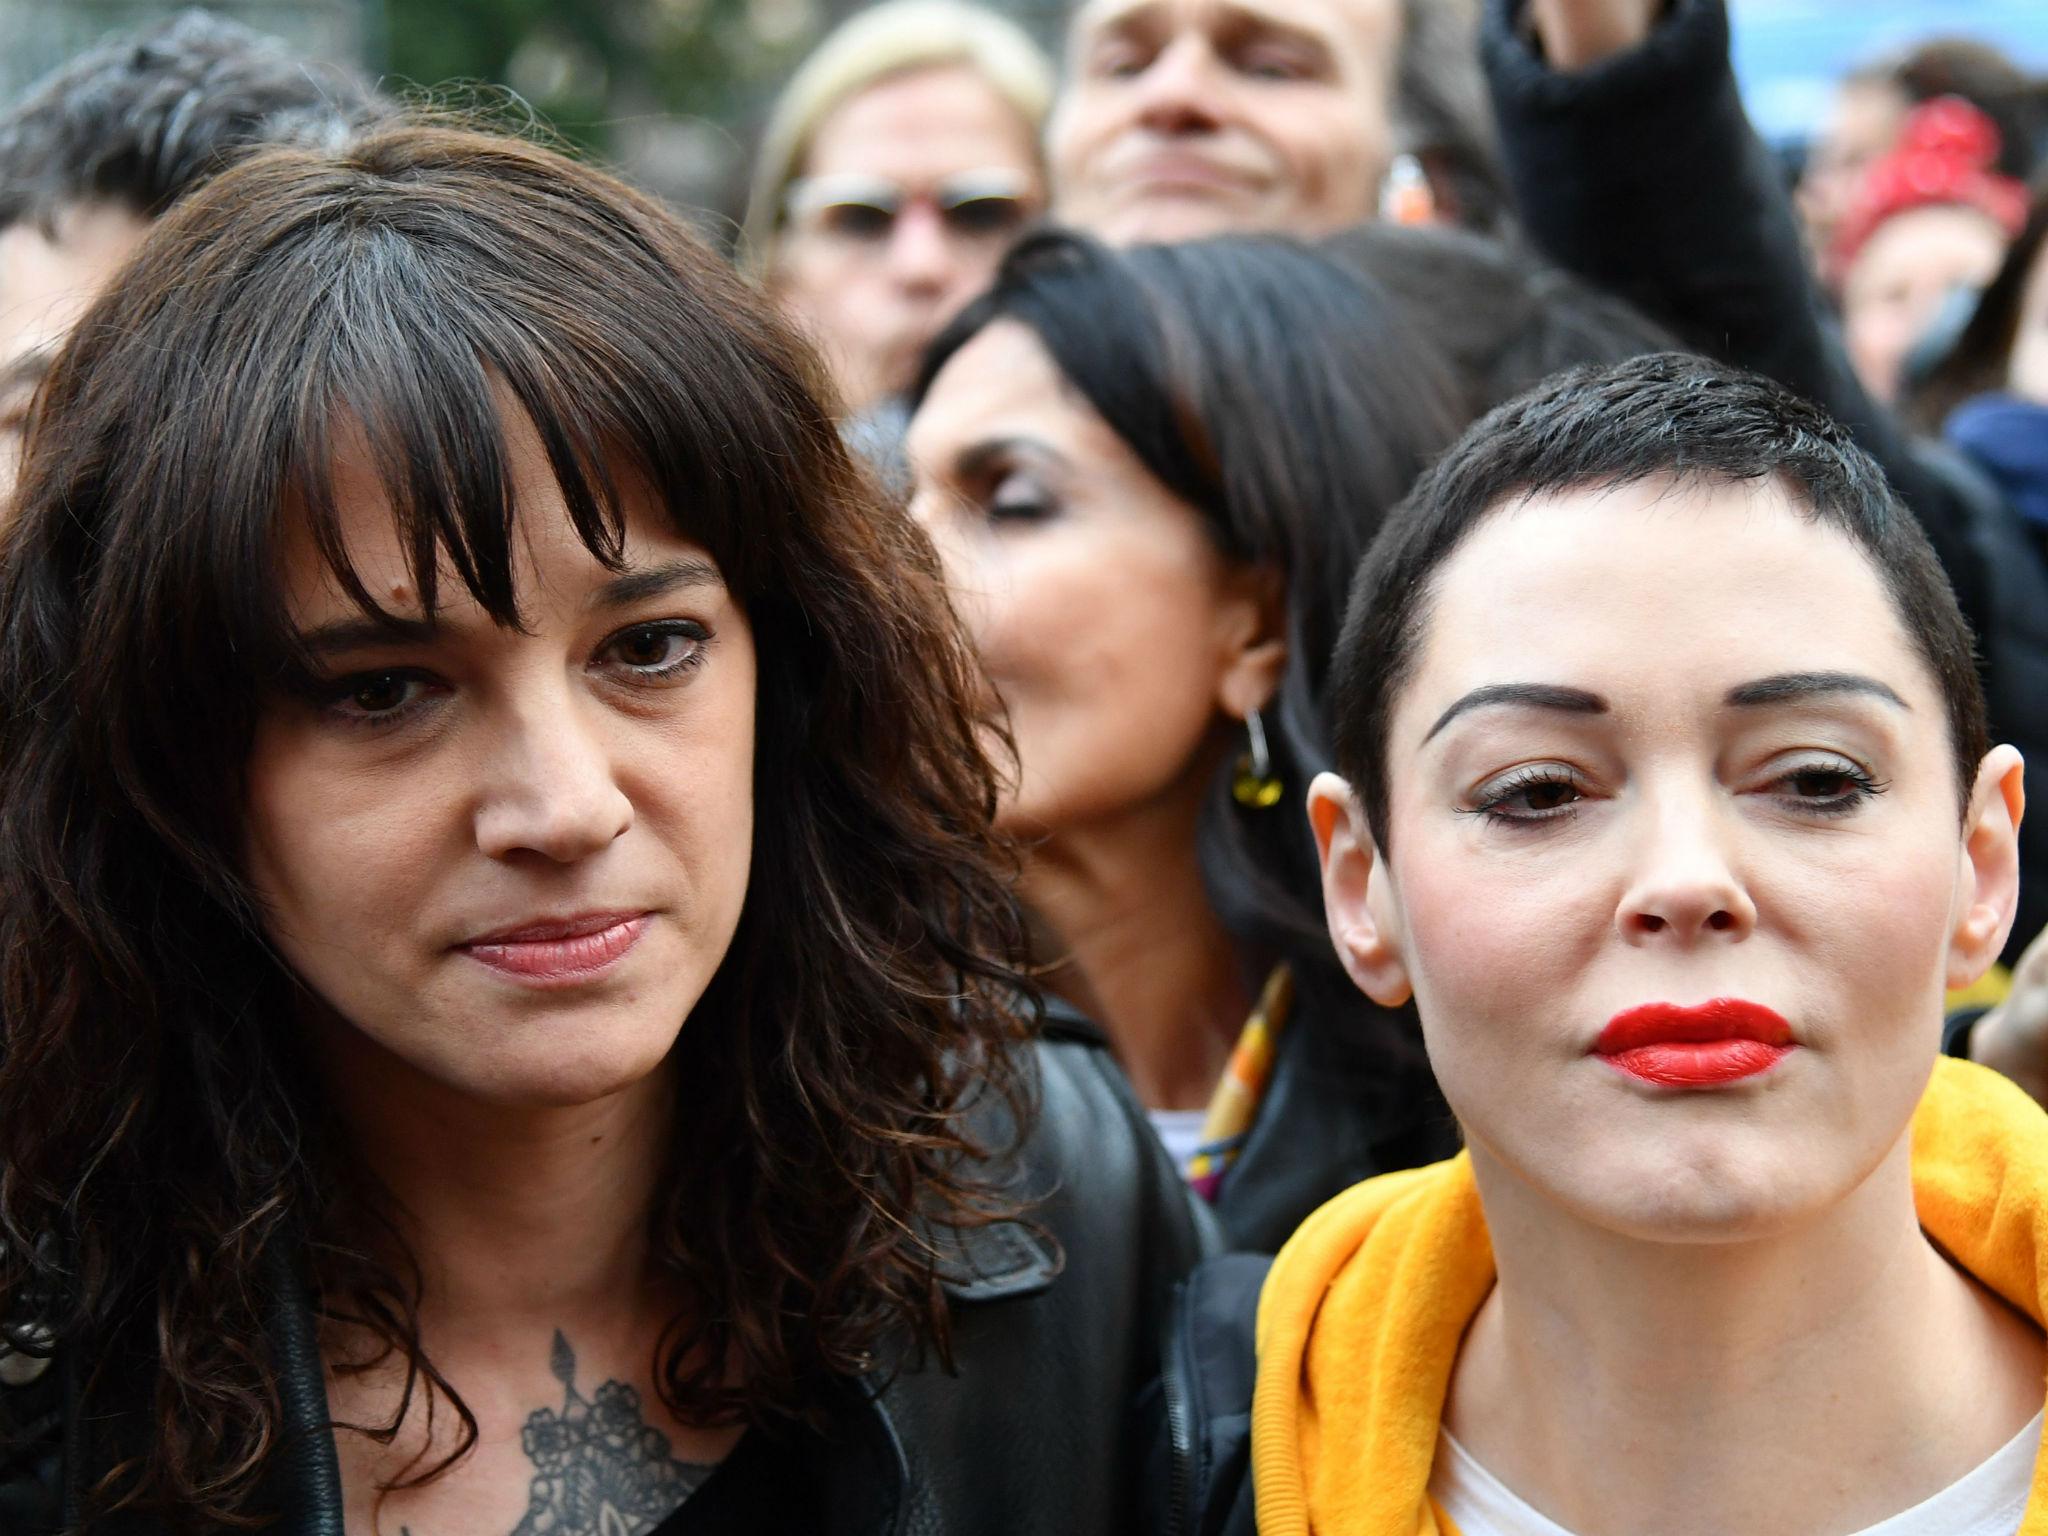 Asia Argento and Rose McGowan taking part in a MeToo march as part of International Women's Day in Rome in 2018